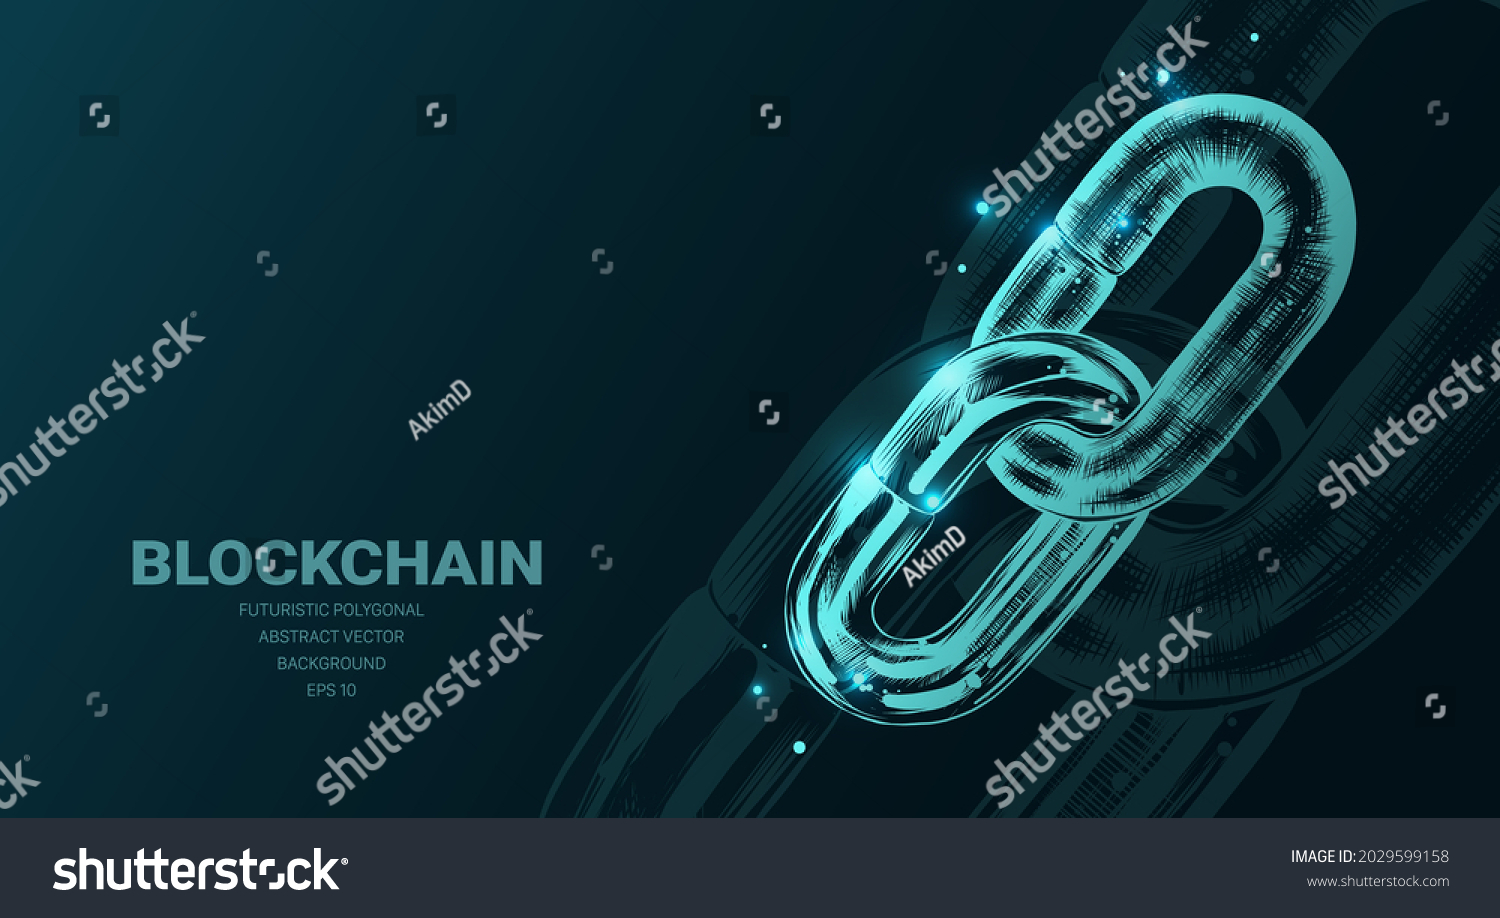 SVG of Futuristic illustration with hologram neon blockchain sketch, concept glowing icon sign on dark background. Vector digital art, technology, finance, bitcoin, crypto concept. svg